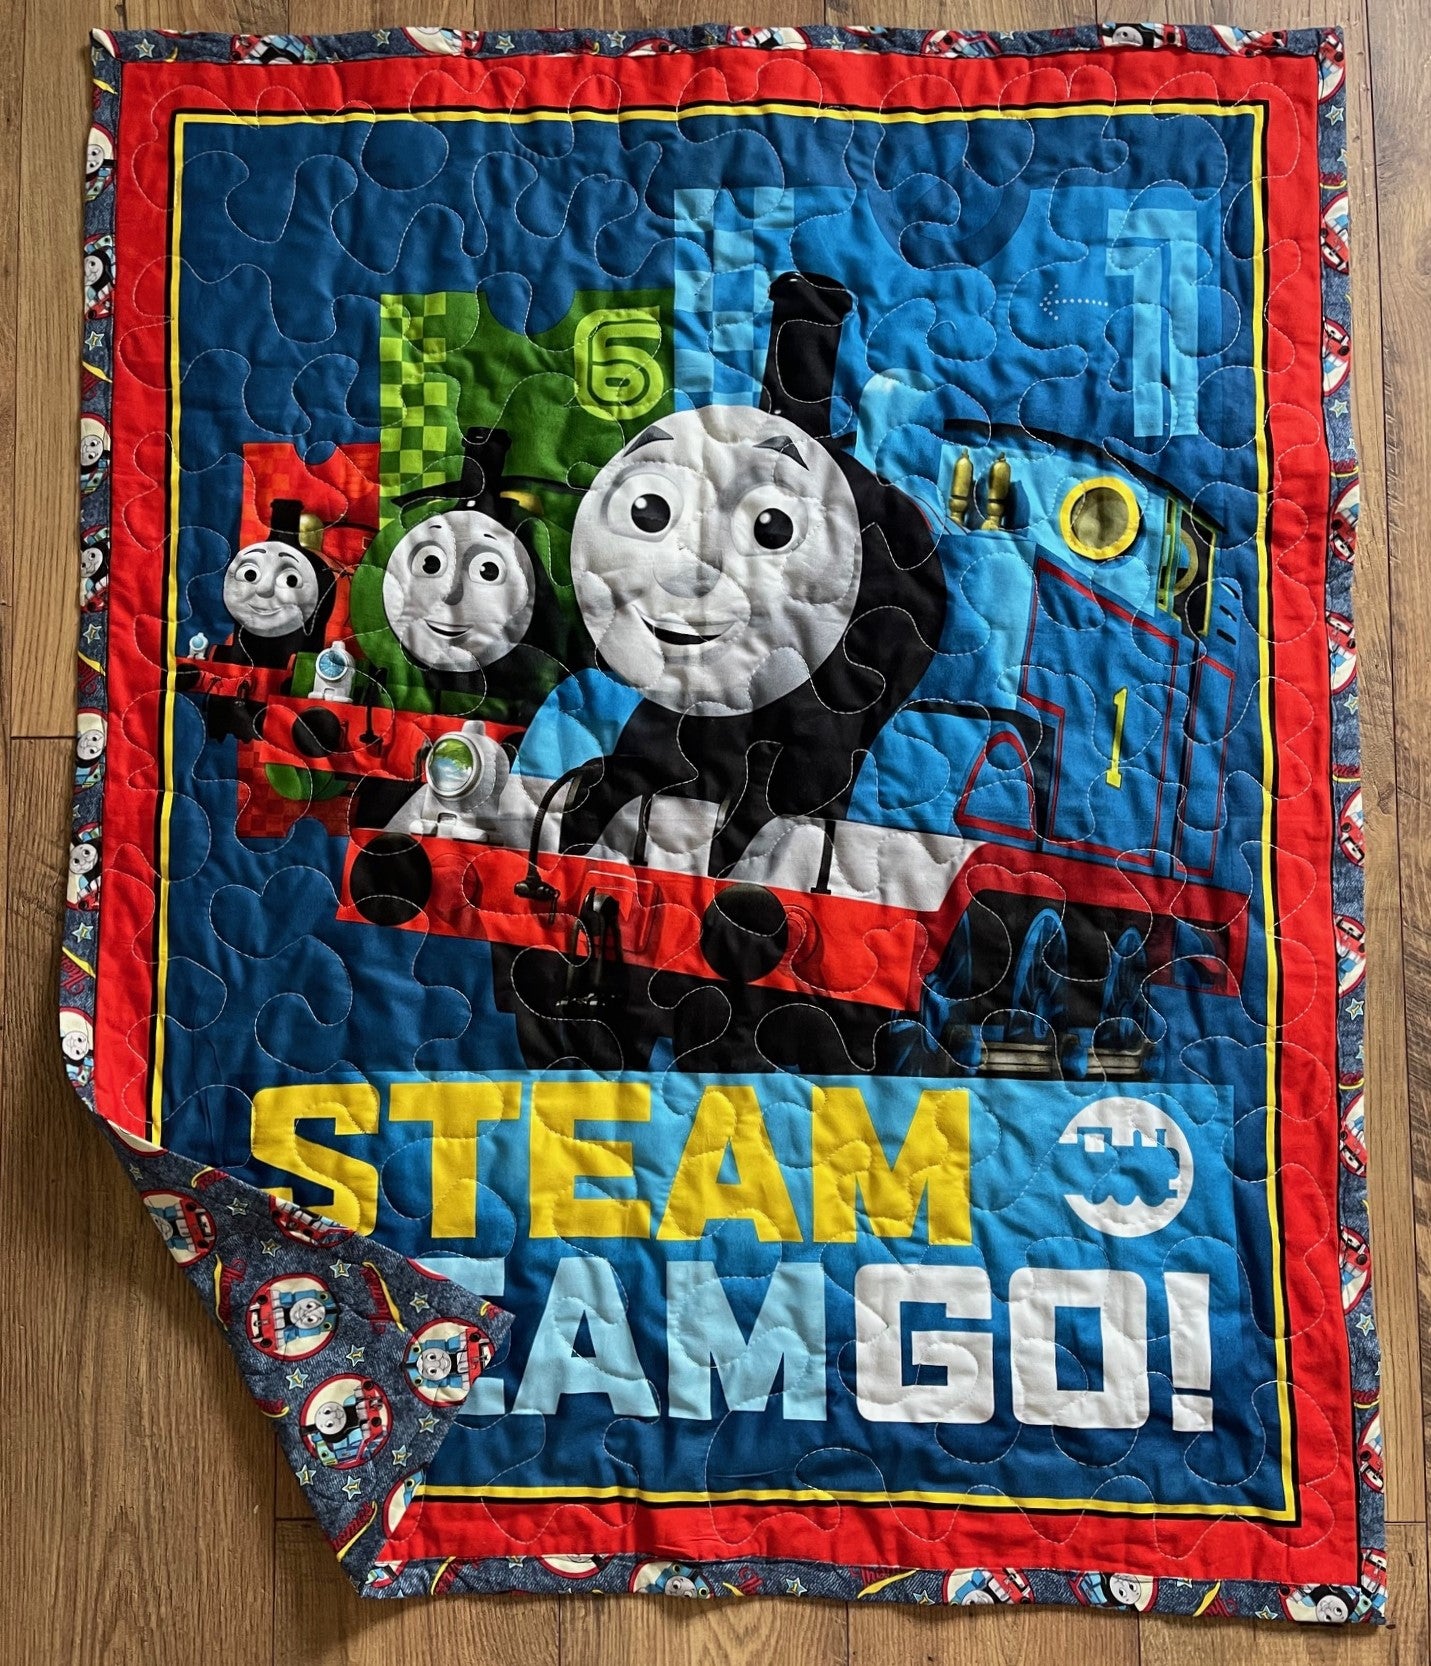 THOMAS THE TRAIN 36"X44" TEAM STEAM GO! QUILTED BLANKET